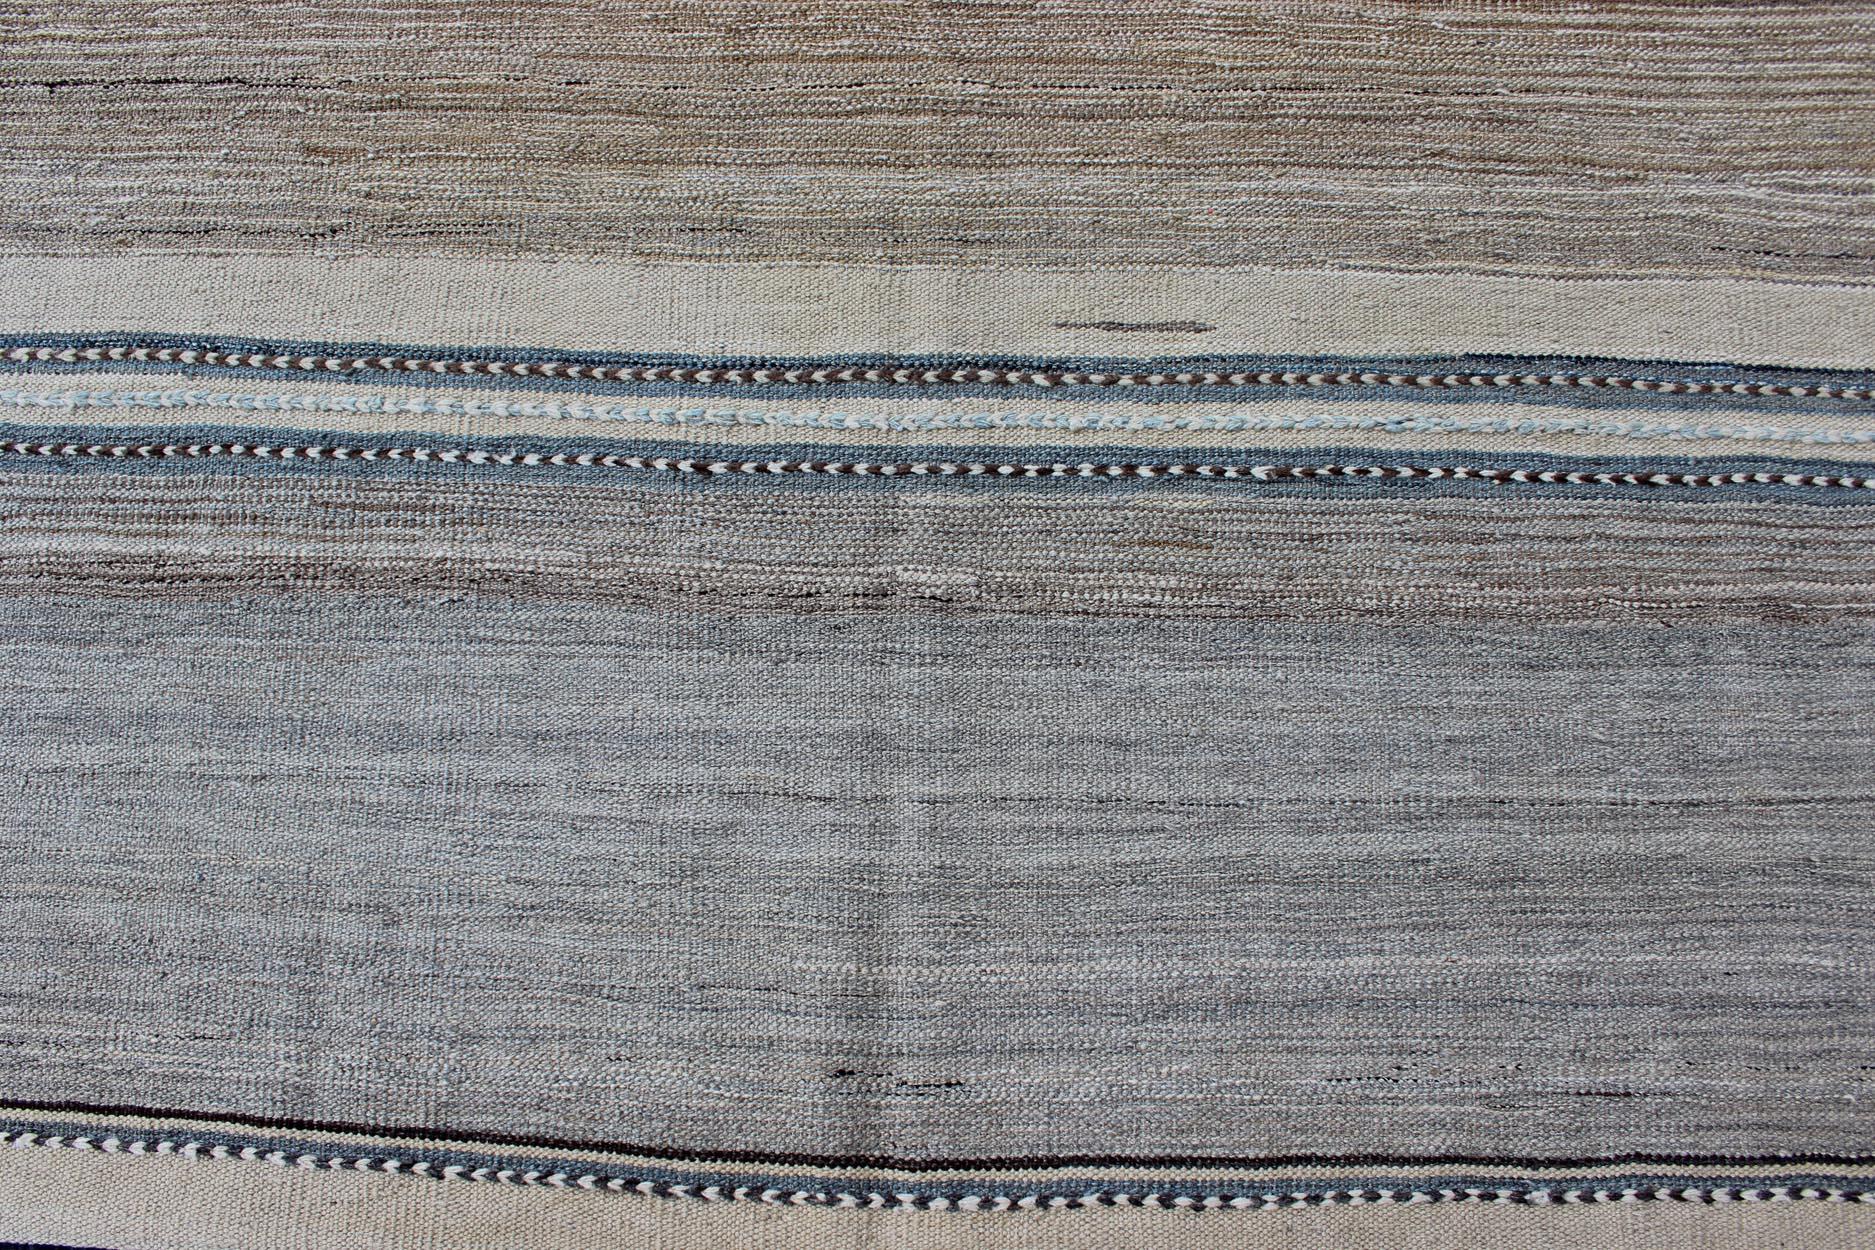 Hand-Knotted Modern Kilim Rug With Large Stripes in Shades of Blue, Taupe, Light Brown, Gray  For Sale